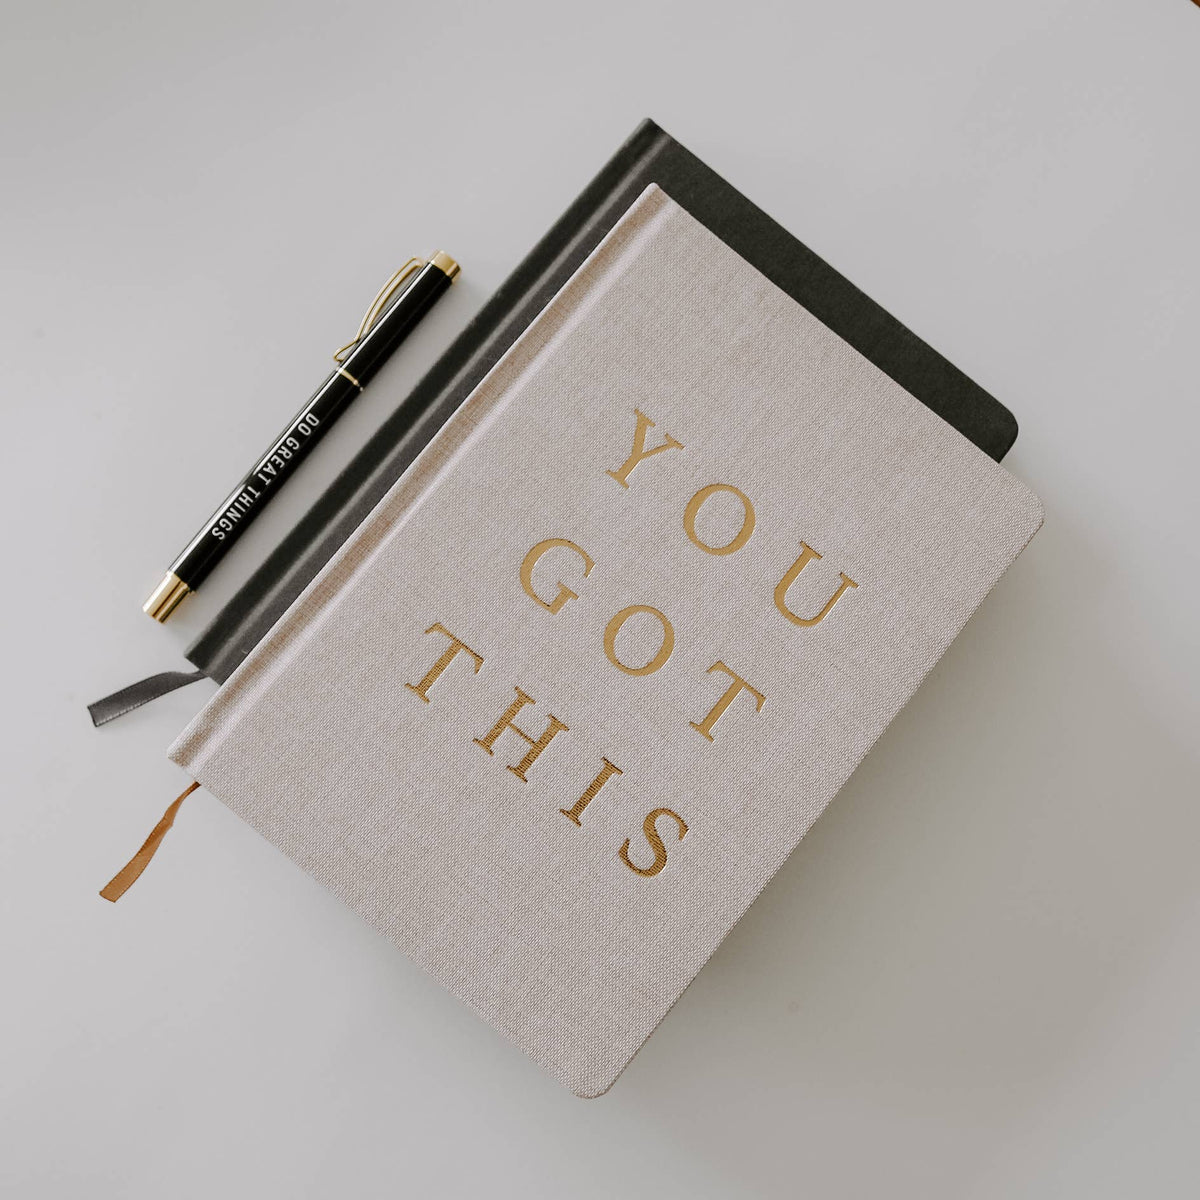 You Got This - Tan and Gold Foil Fabric Journal - Olivia Macaron